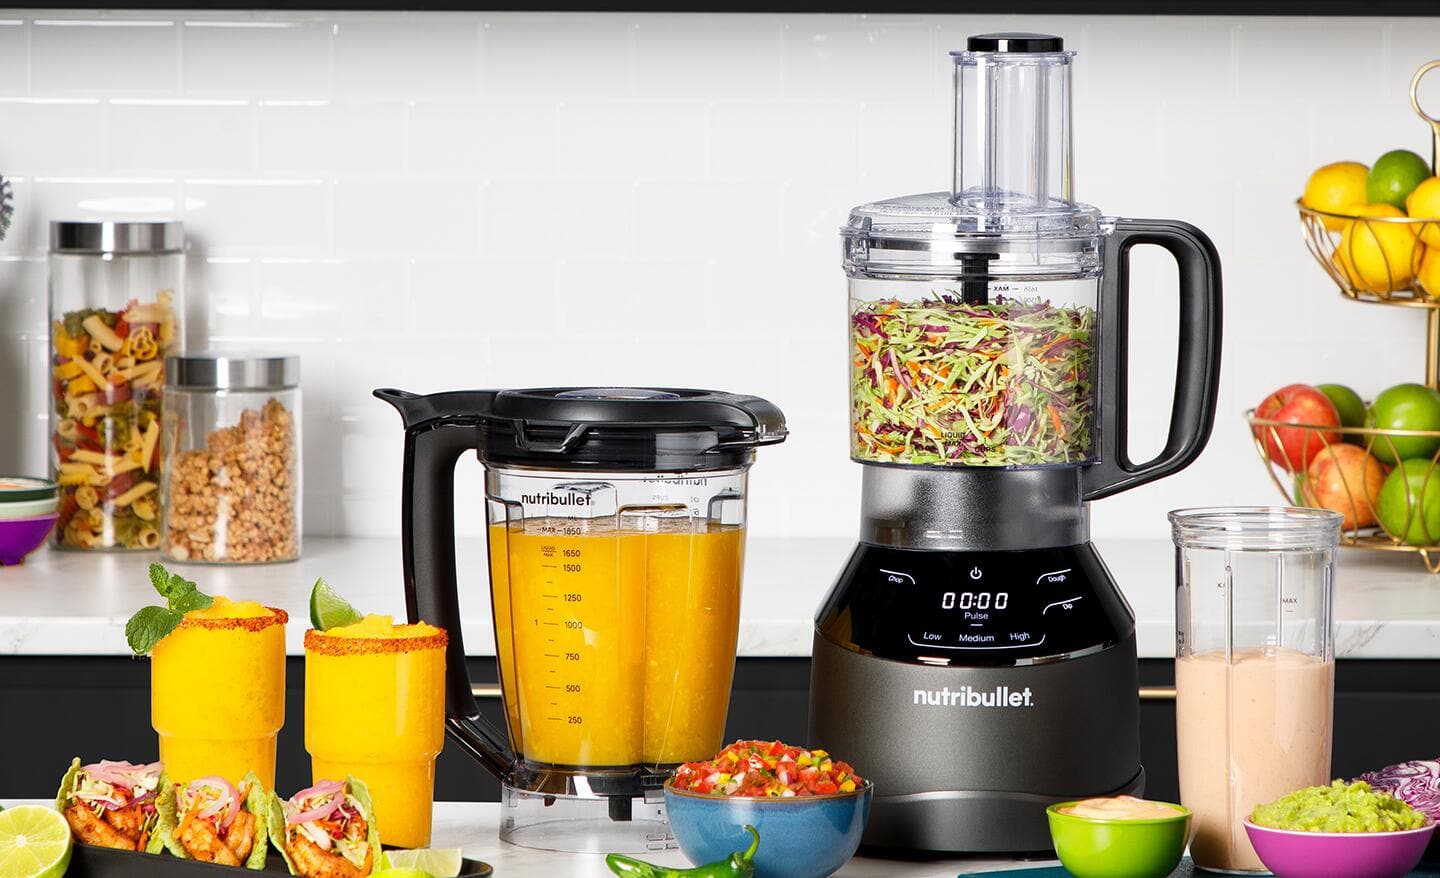 A food processor with accessories on a kitchen counter